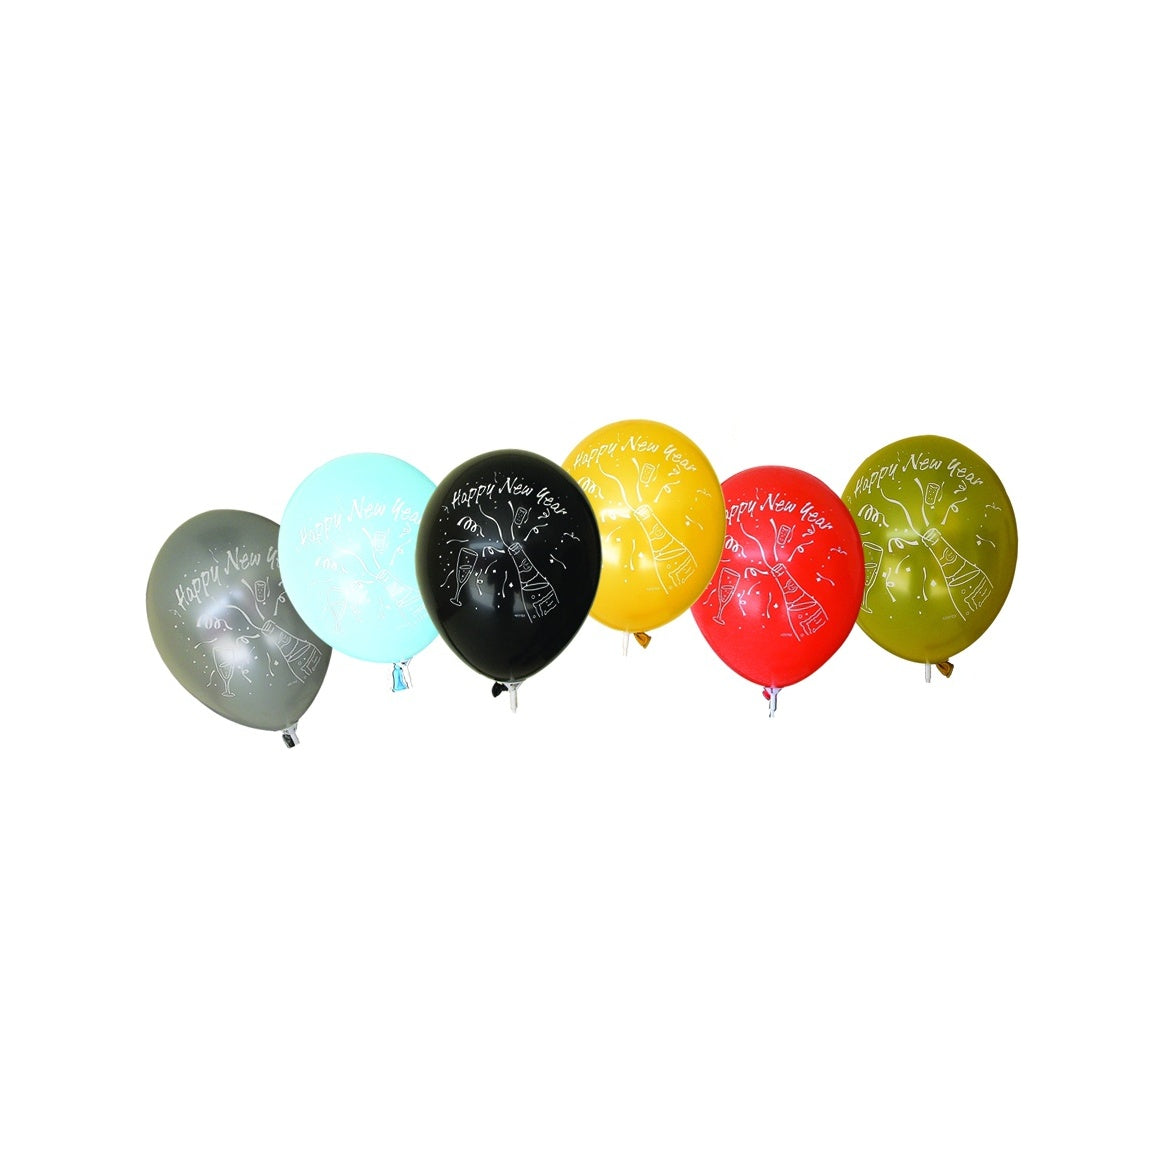 Biodegredable, Helium-Quality, Happy New Year Balloons